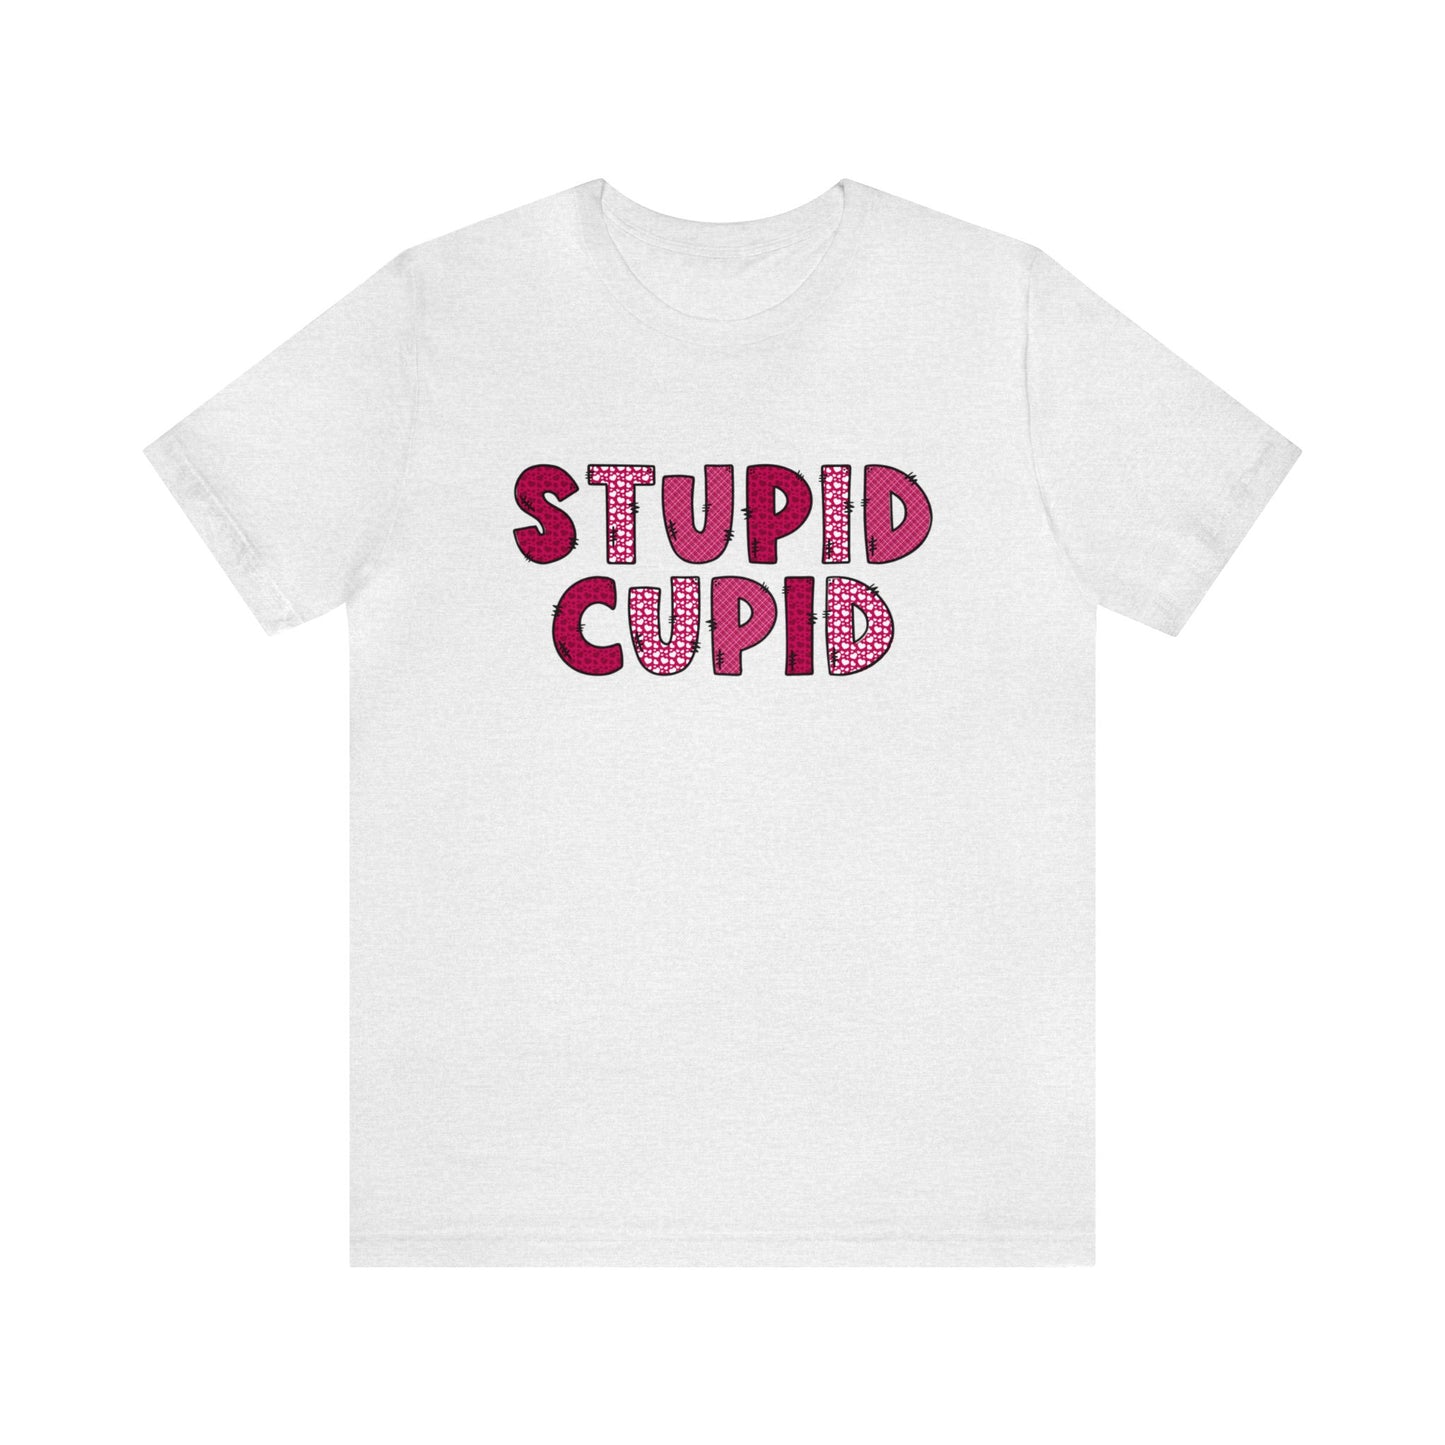 Stupid Cupid T-shirt, Valentine's Day Tee, Unisex Bella and Canvas Shirt